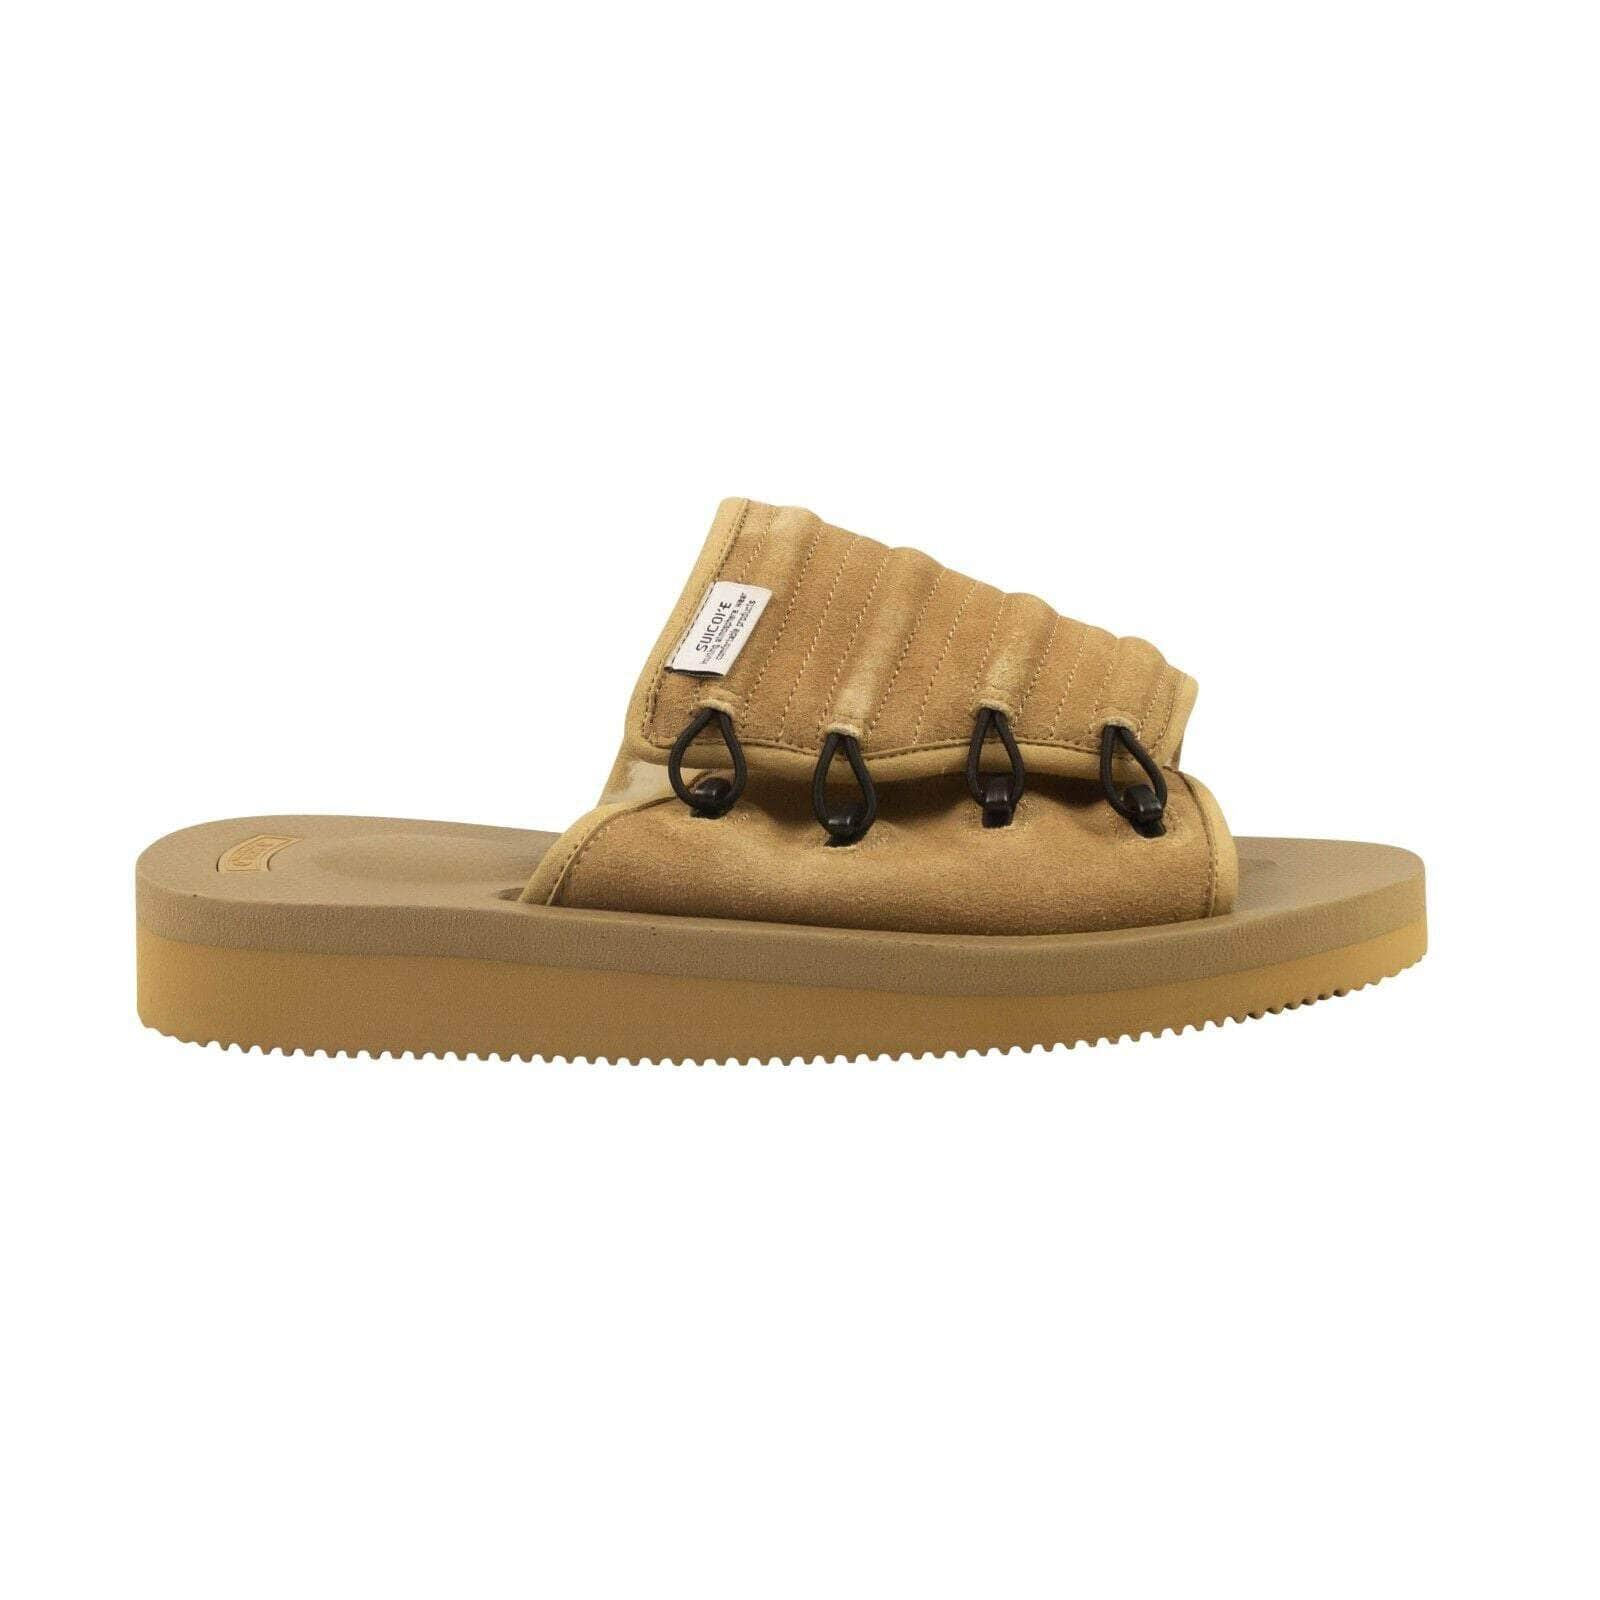 Suicoke channelenable-all, chicmi, couponcollection, gender-mens, main-shoes, mens-shoes, mens-slides-slippers, size-6, size-9, suicoke, under-250 Beige Mura Leather VM AB Fur Slides